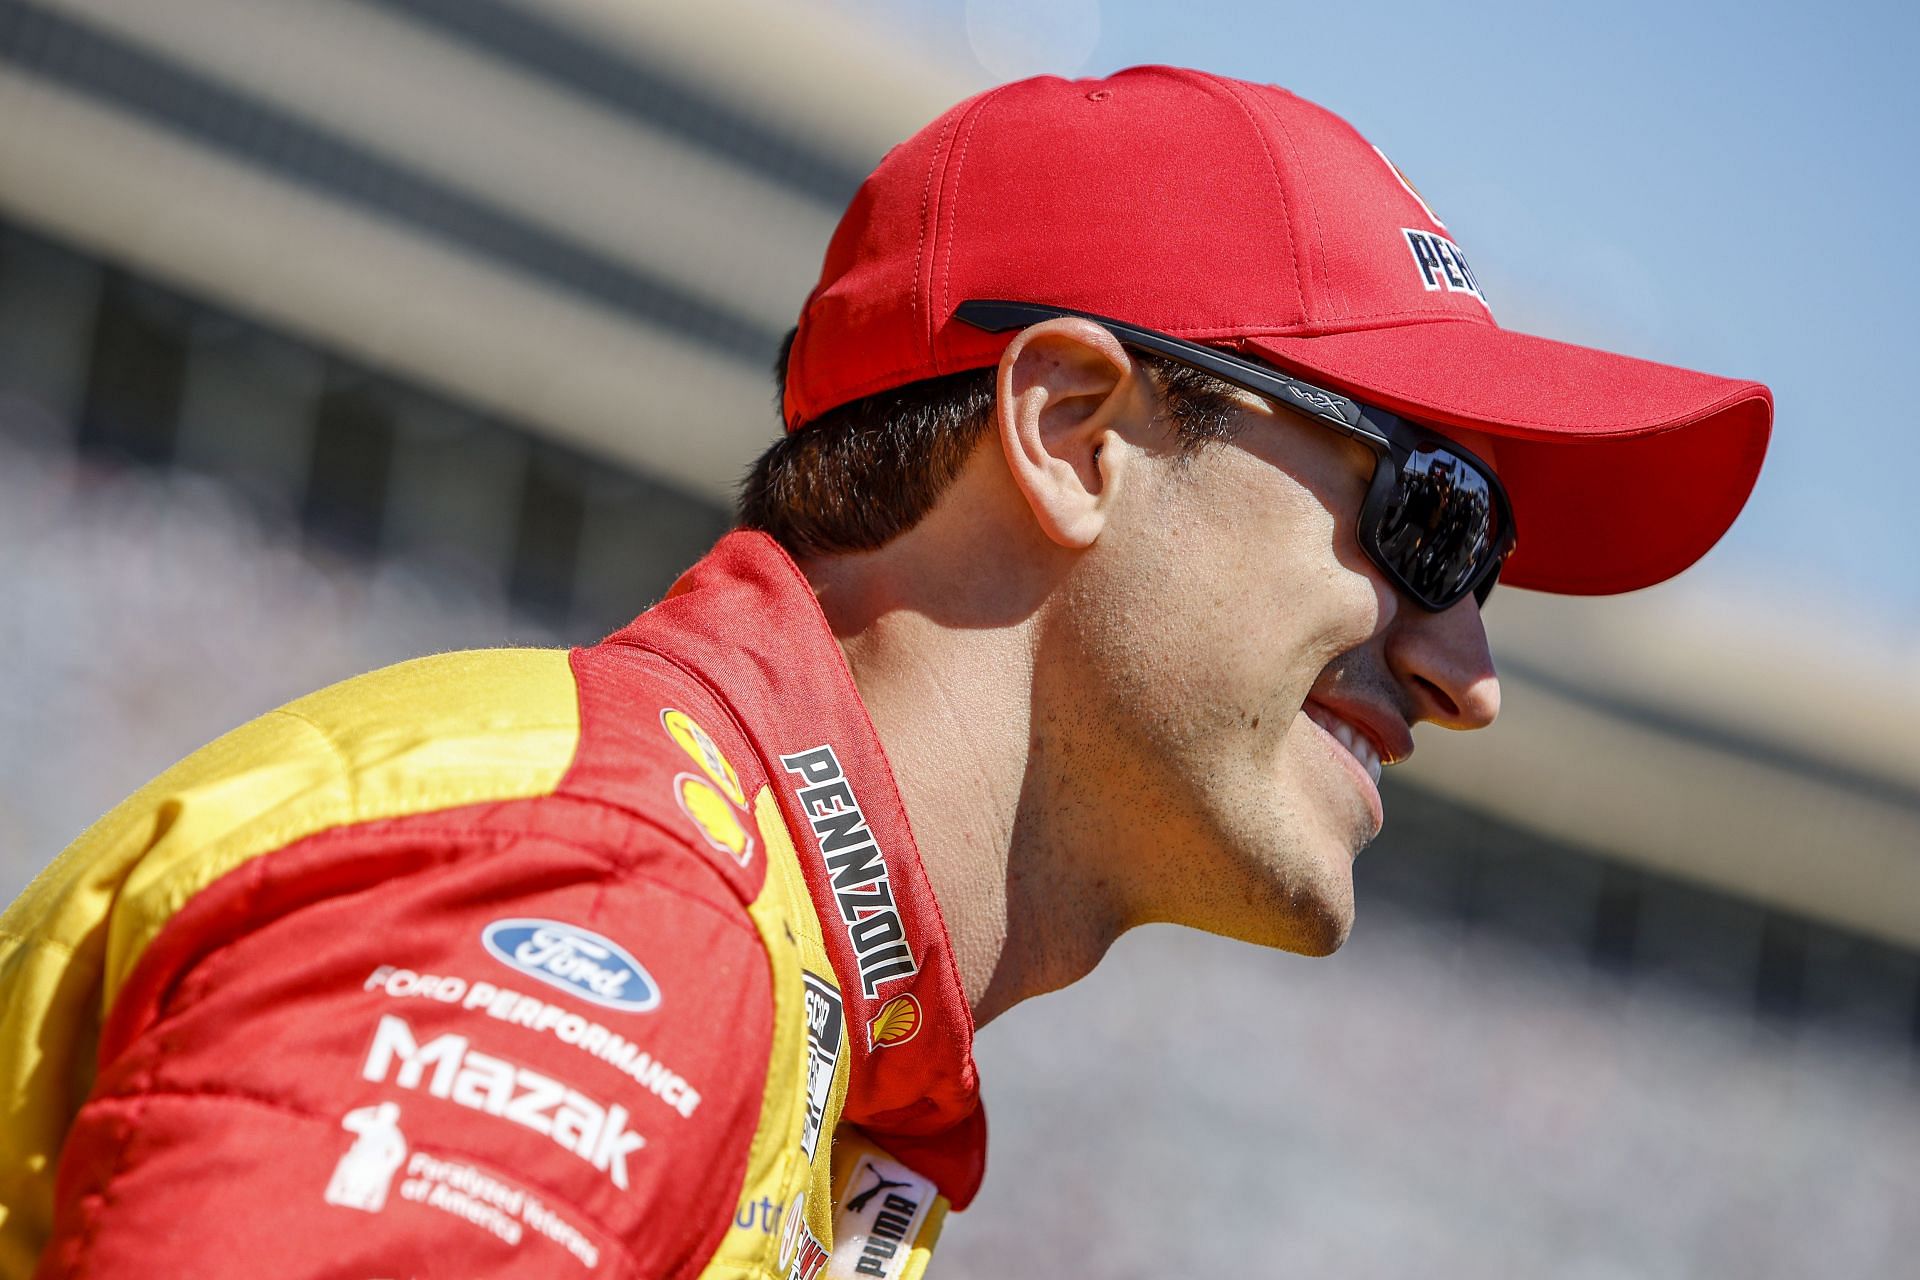 Joey Logano waits on the grid before the NASCAR Cup Series Folds of Honor QuikTrip 500 at Atlanta Motor Speedway (Photo by Sean Gardner/Getty Images)